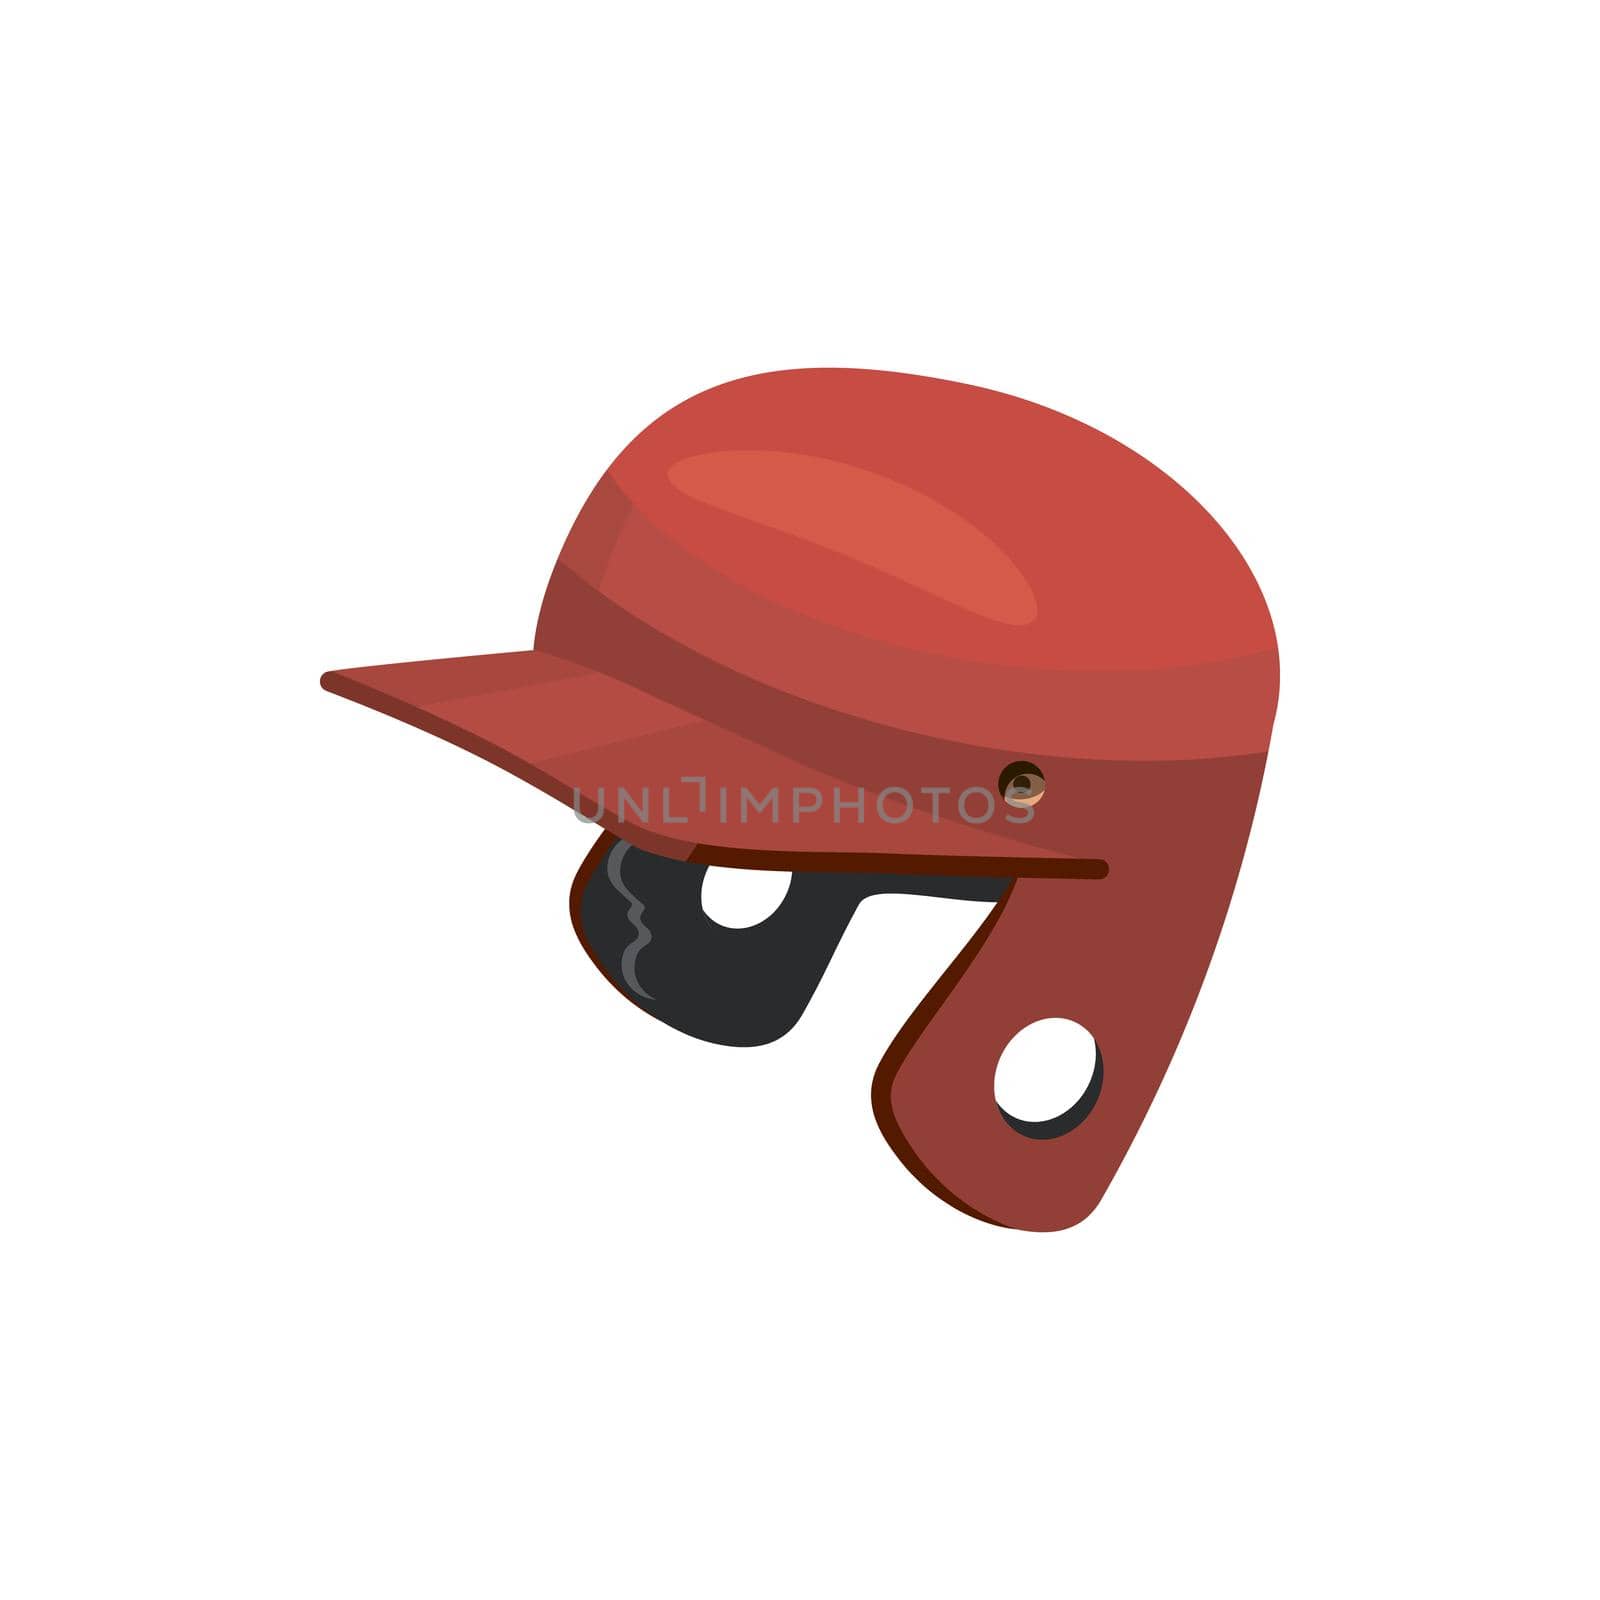 Red baseball helmet icon in cartoon style on a white background